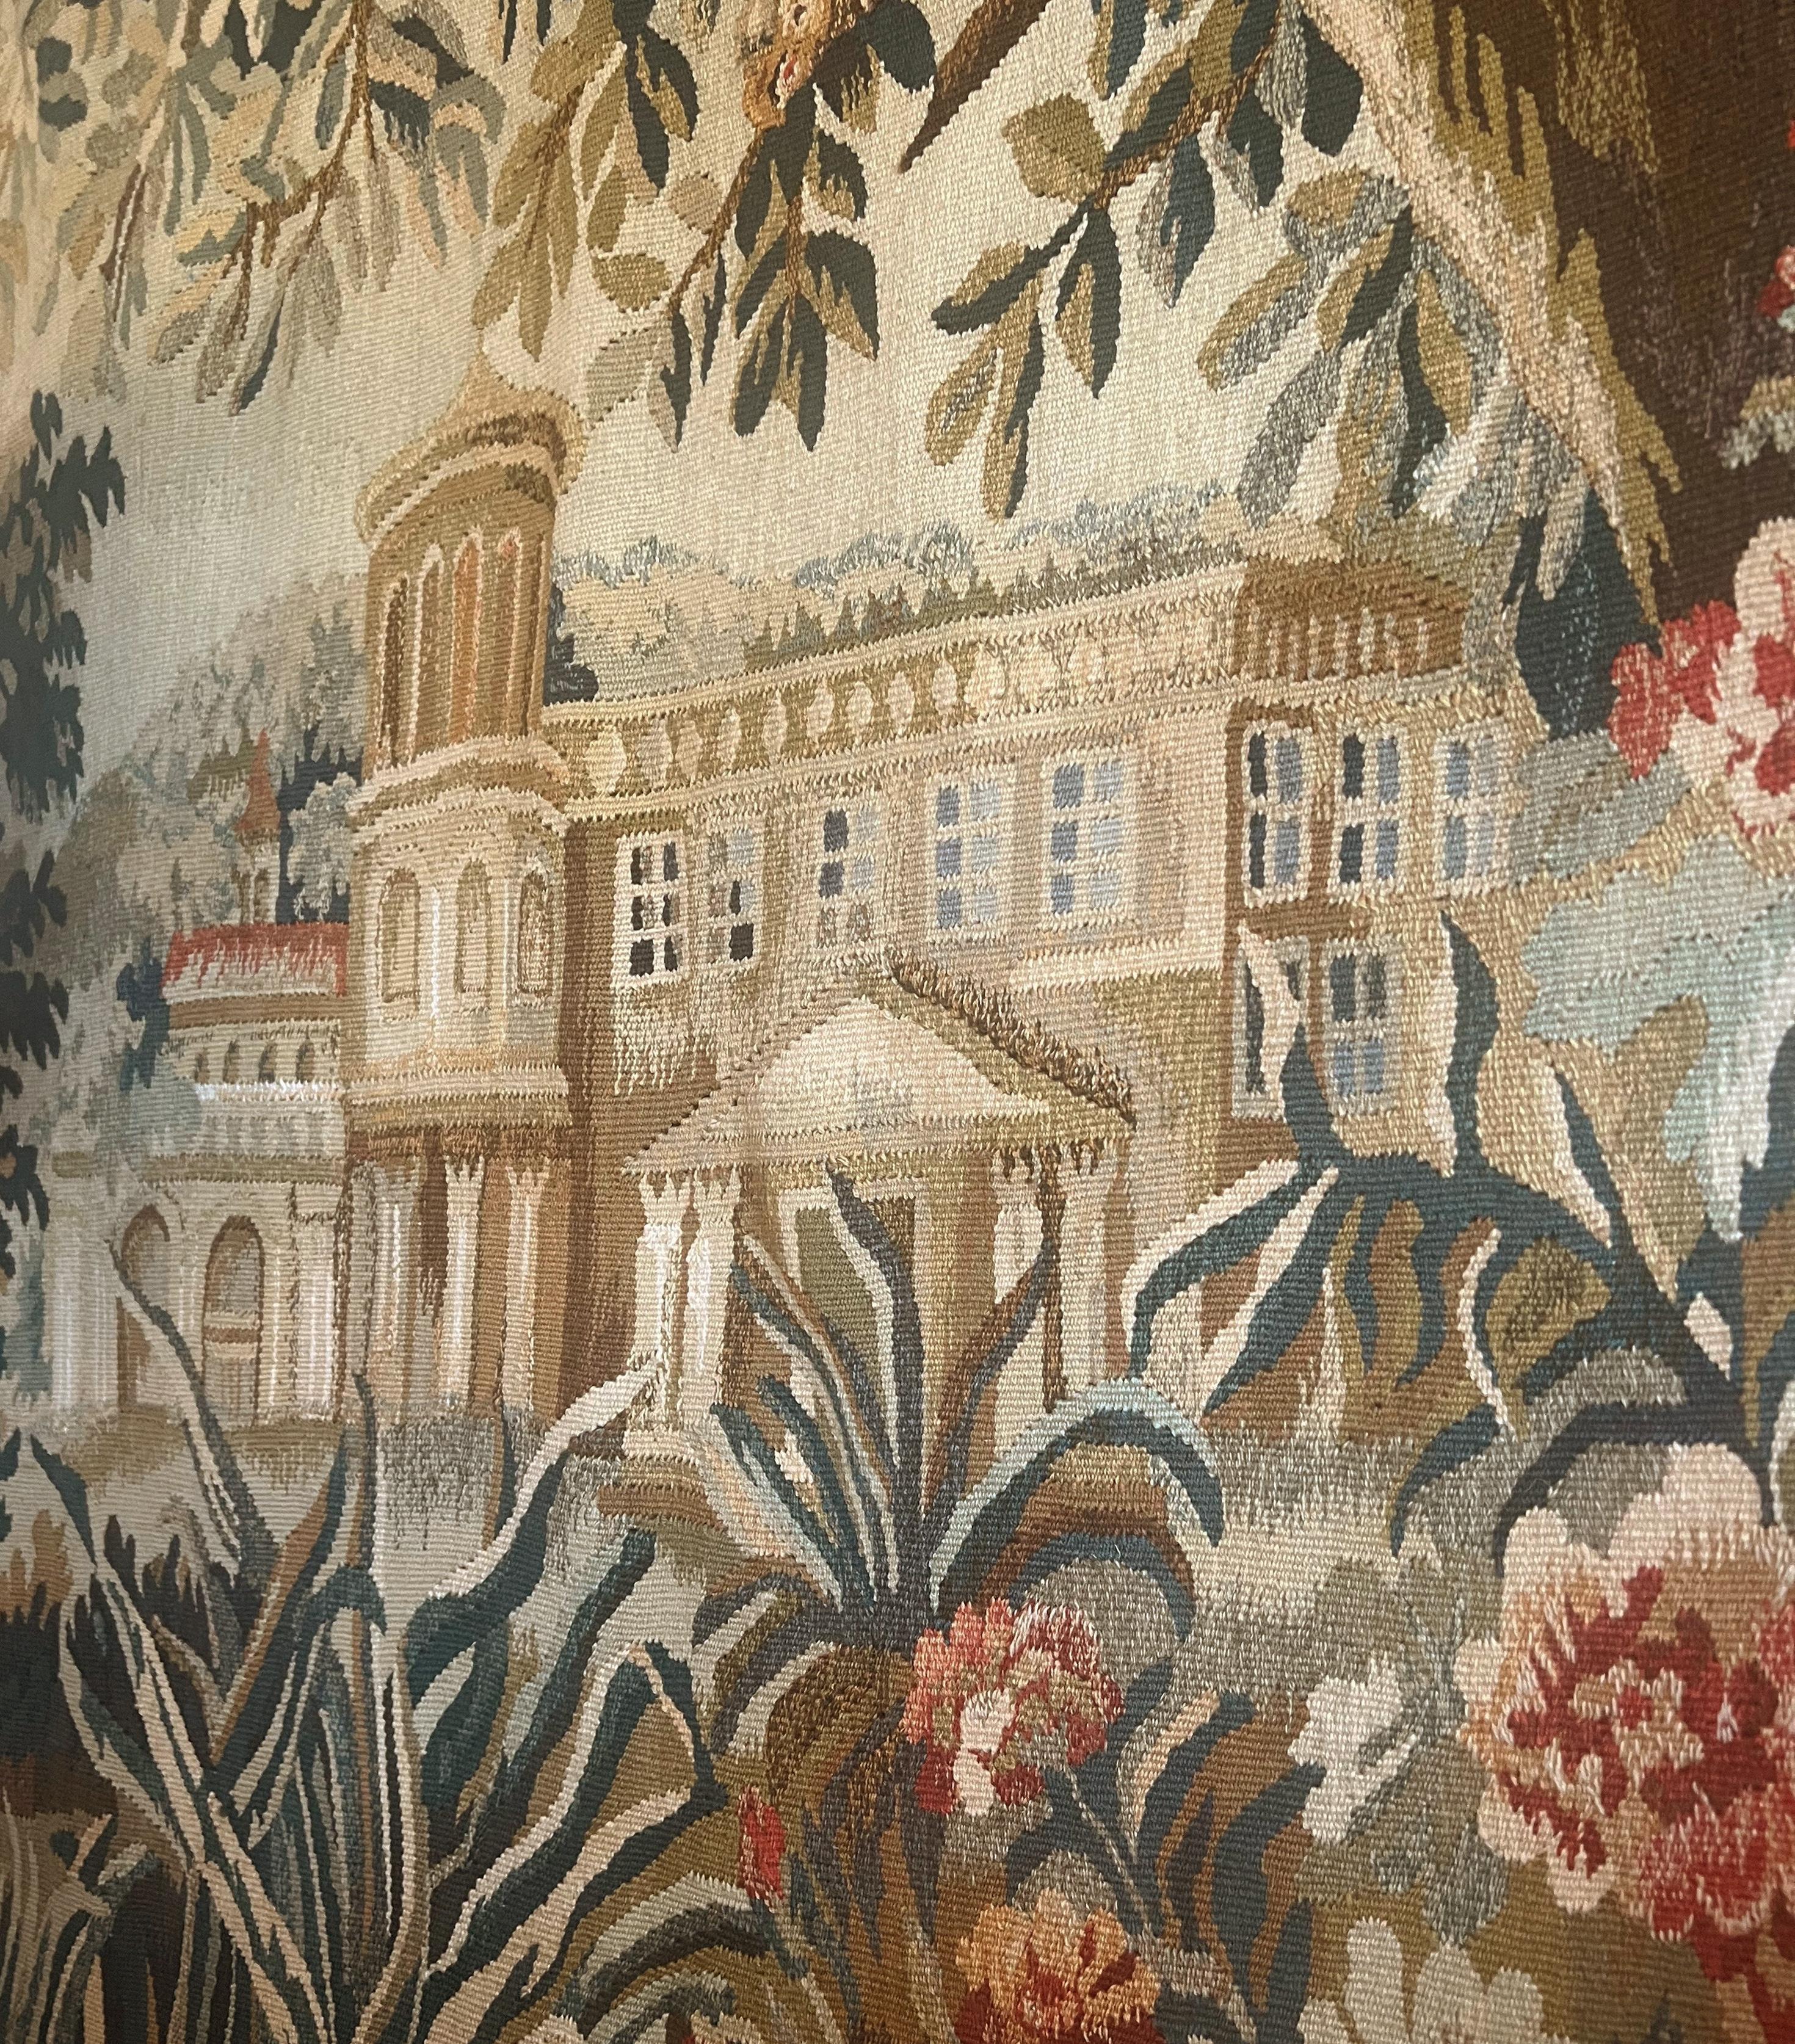 Antique French Verdure Tapestry. Depicts a beautiful European landscape w/ a castle in the background.